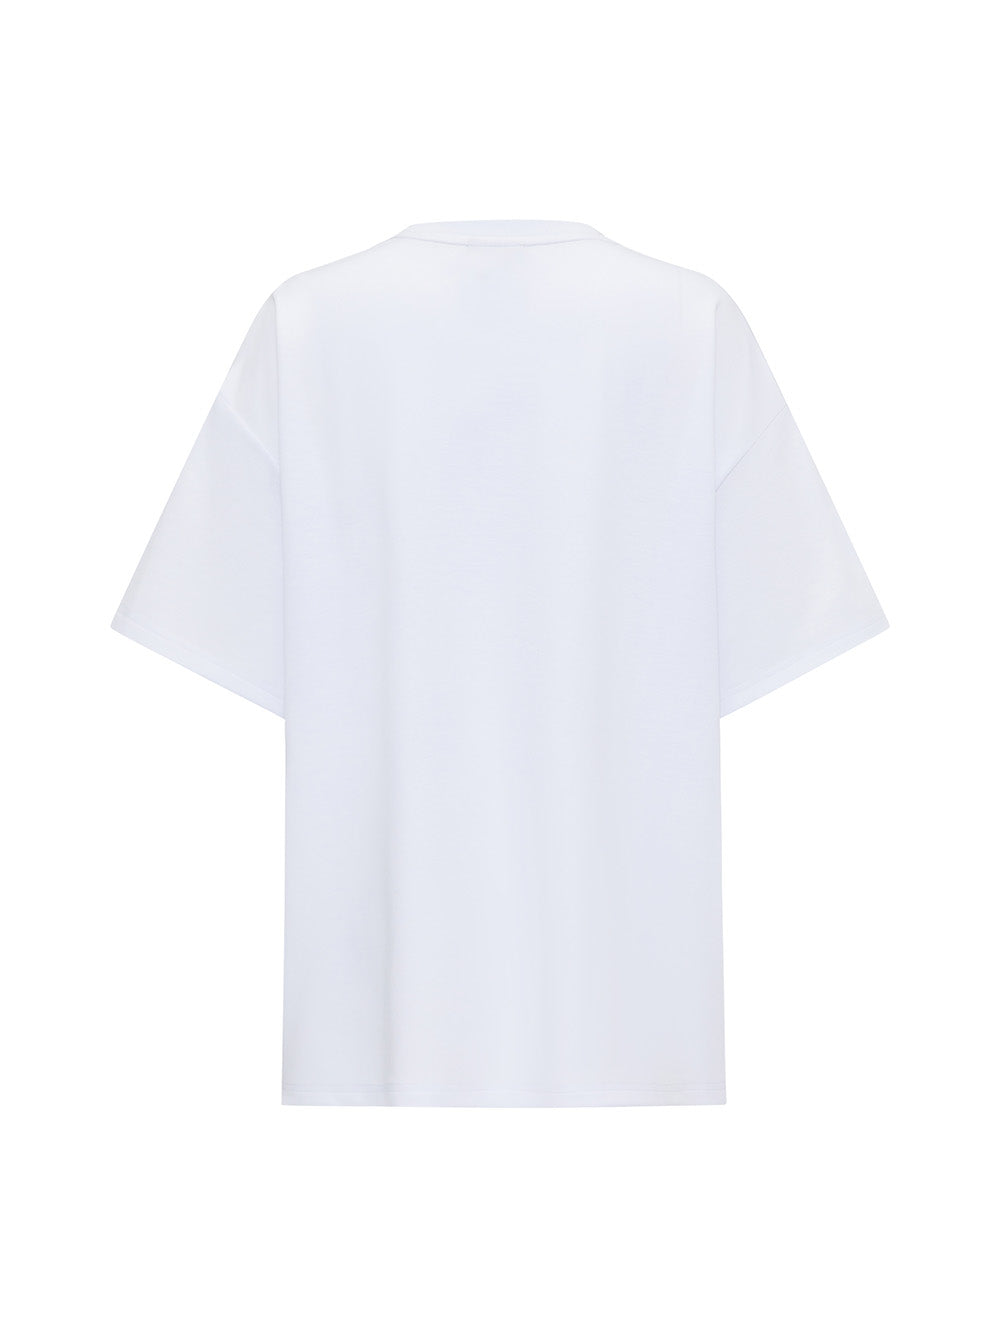 MUKZIN Washed 2-color Casual Versatile Age-reducing T-shirt